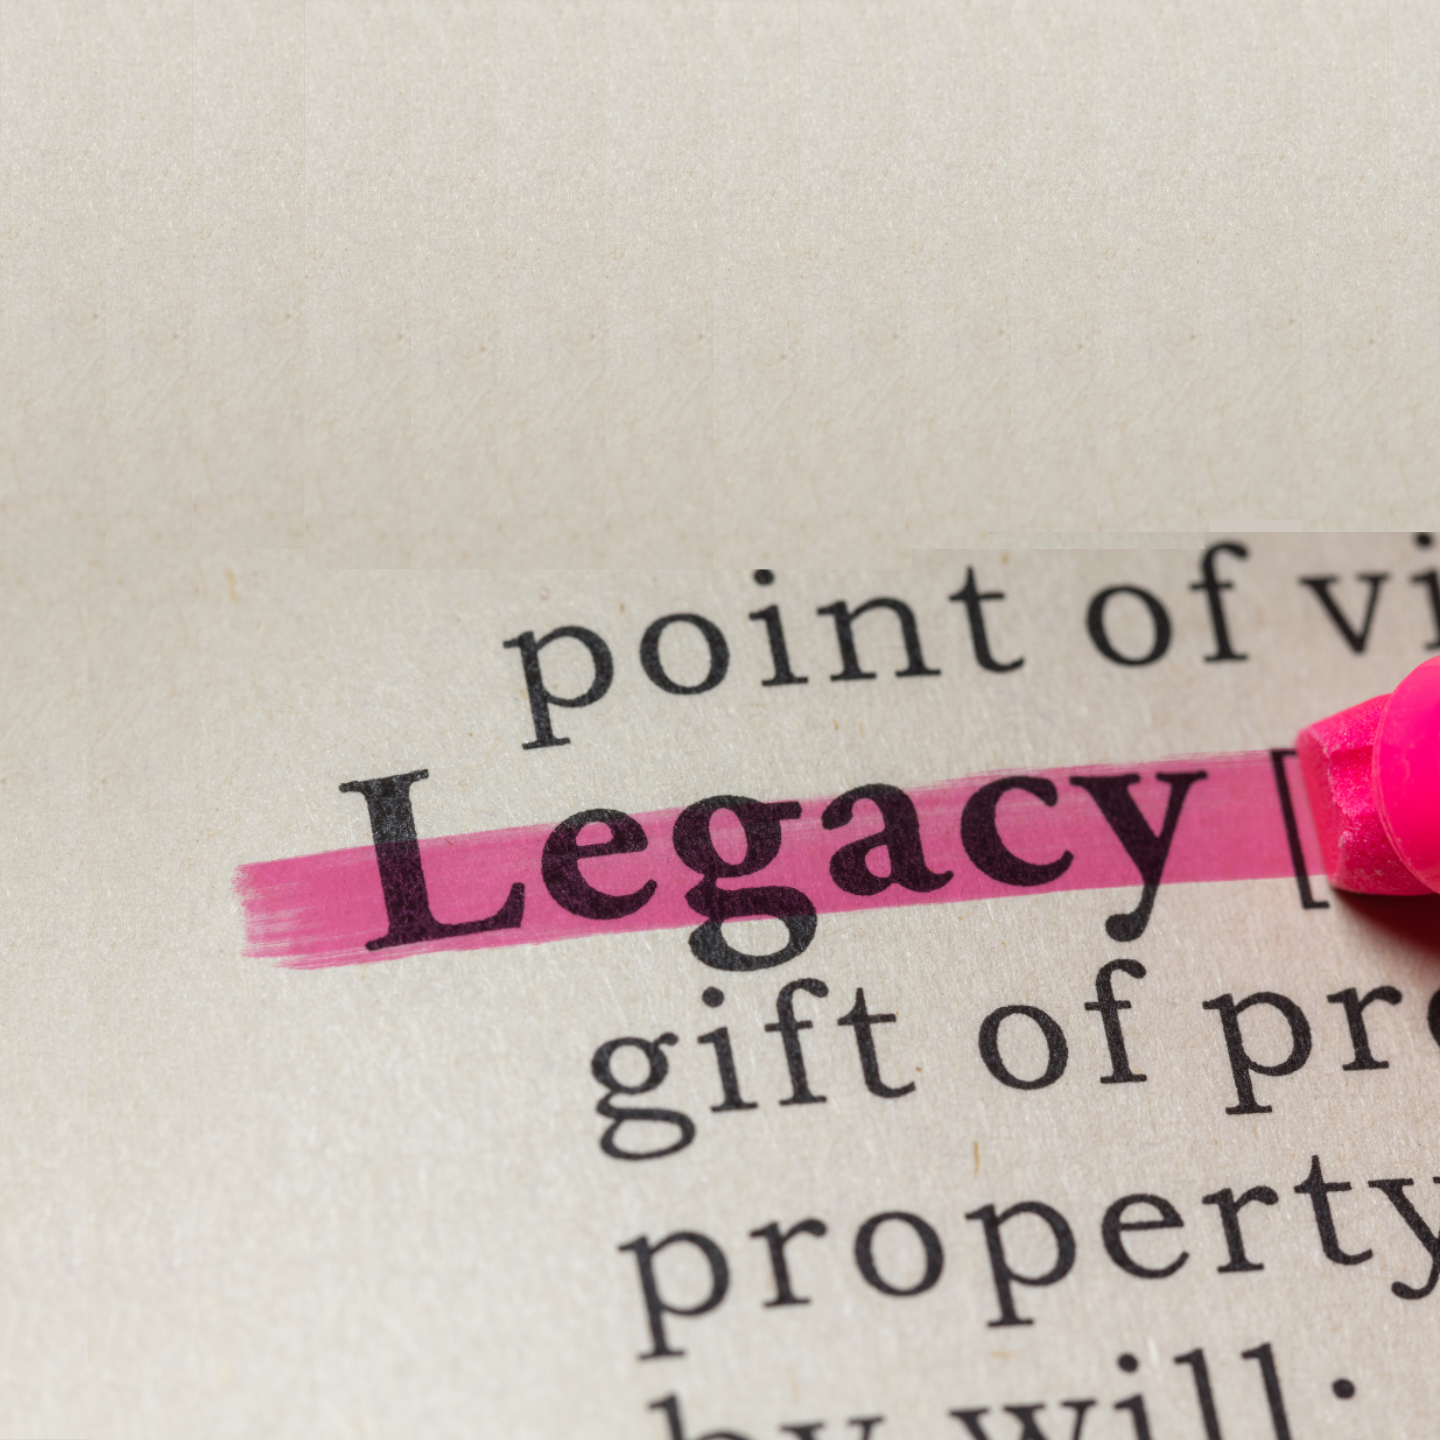 Legacy image highlighted legacy word in dictionary